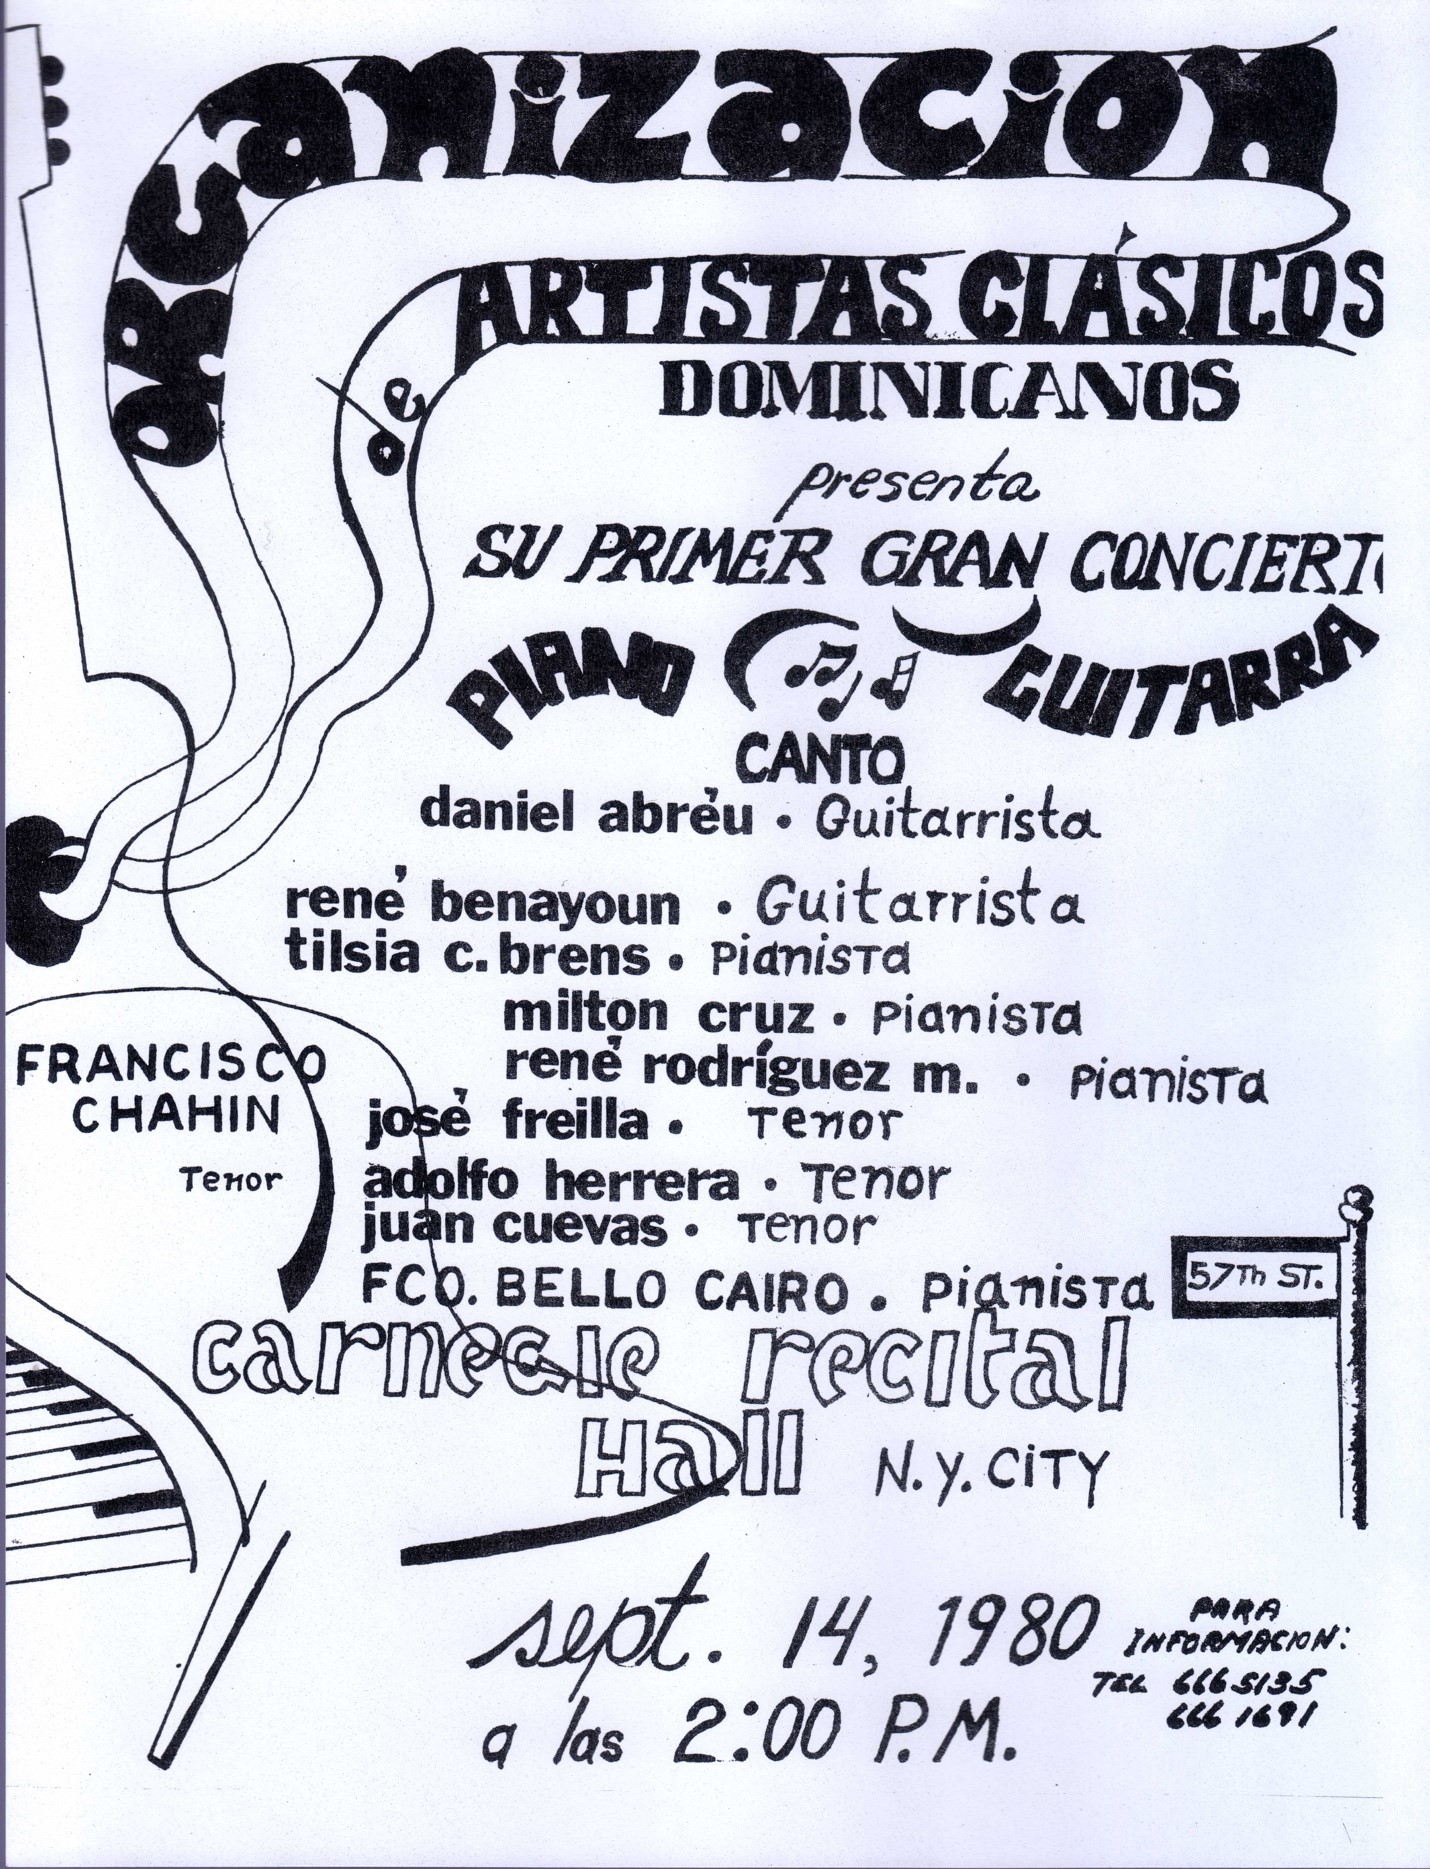 First Concert organized by the Association of Dominican Classical Artists at the Carnegie Recital Hall, New York, September 14, 1980